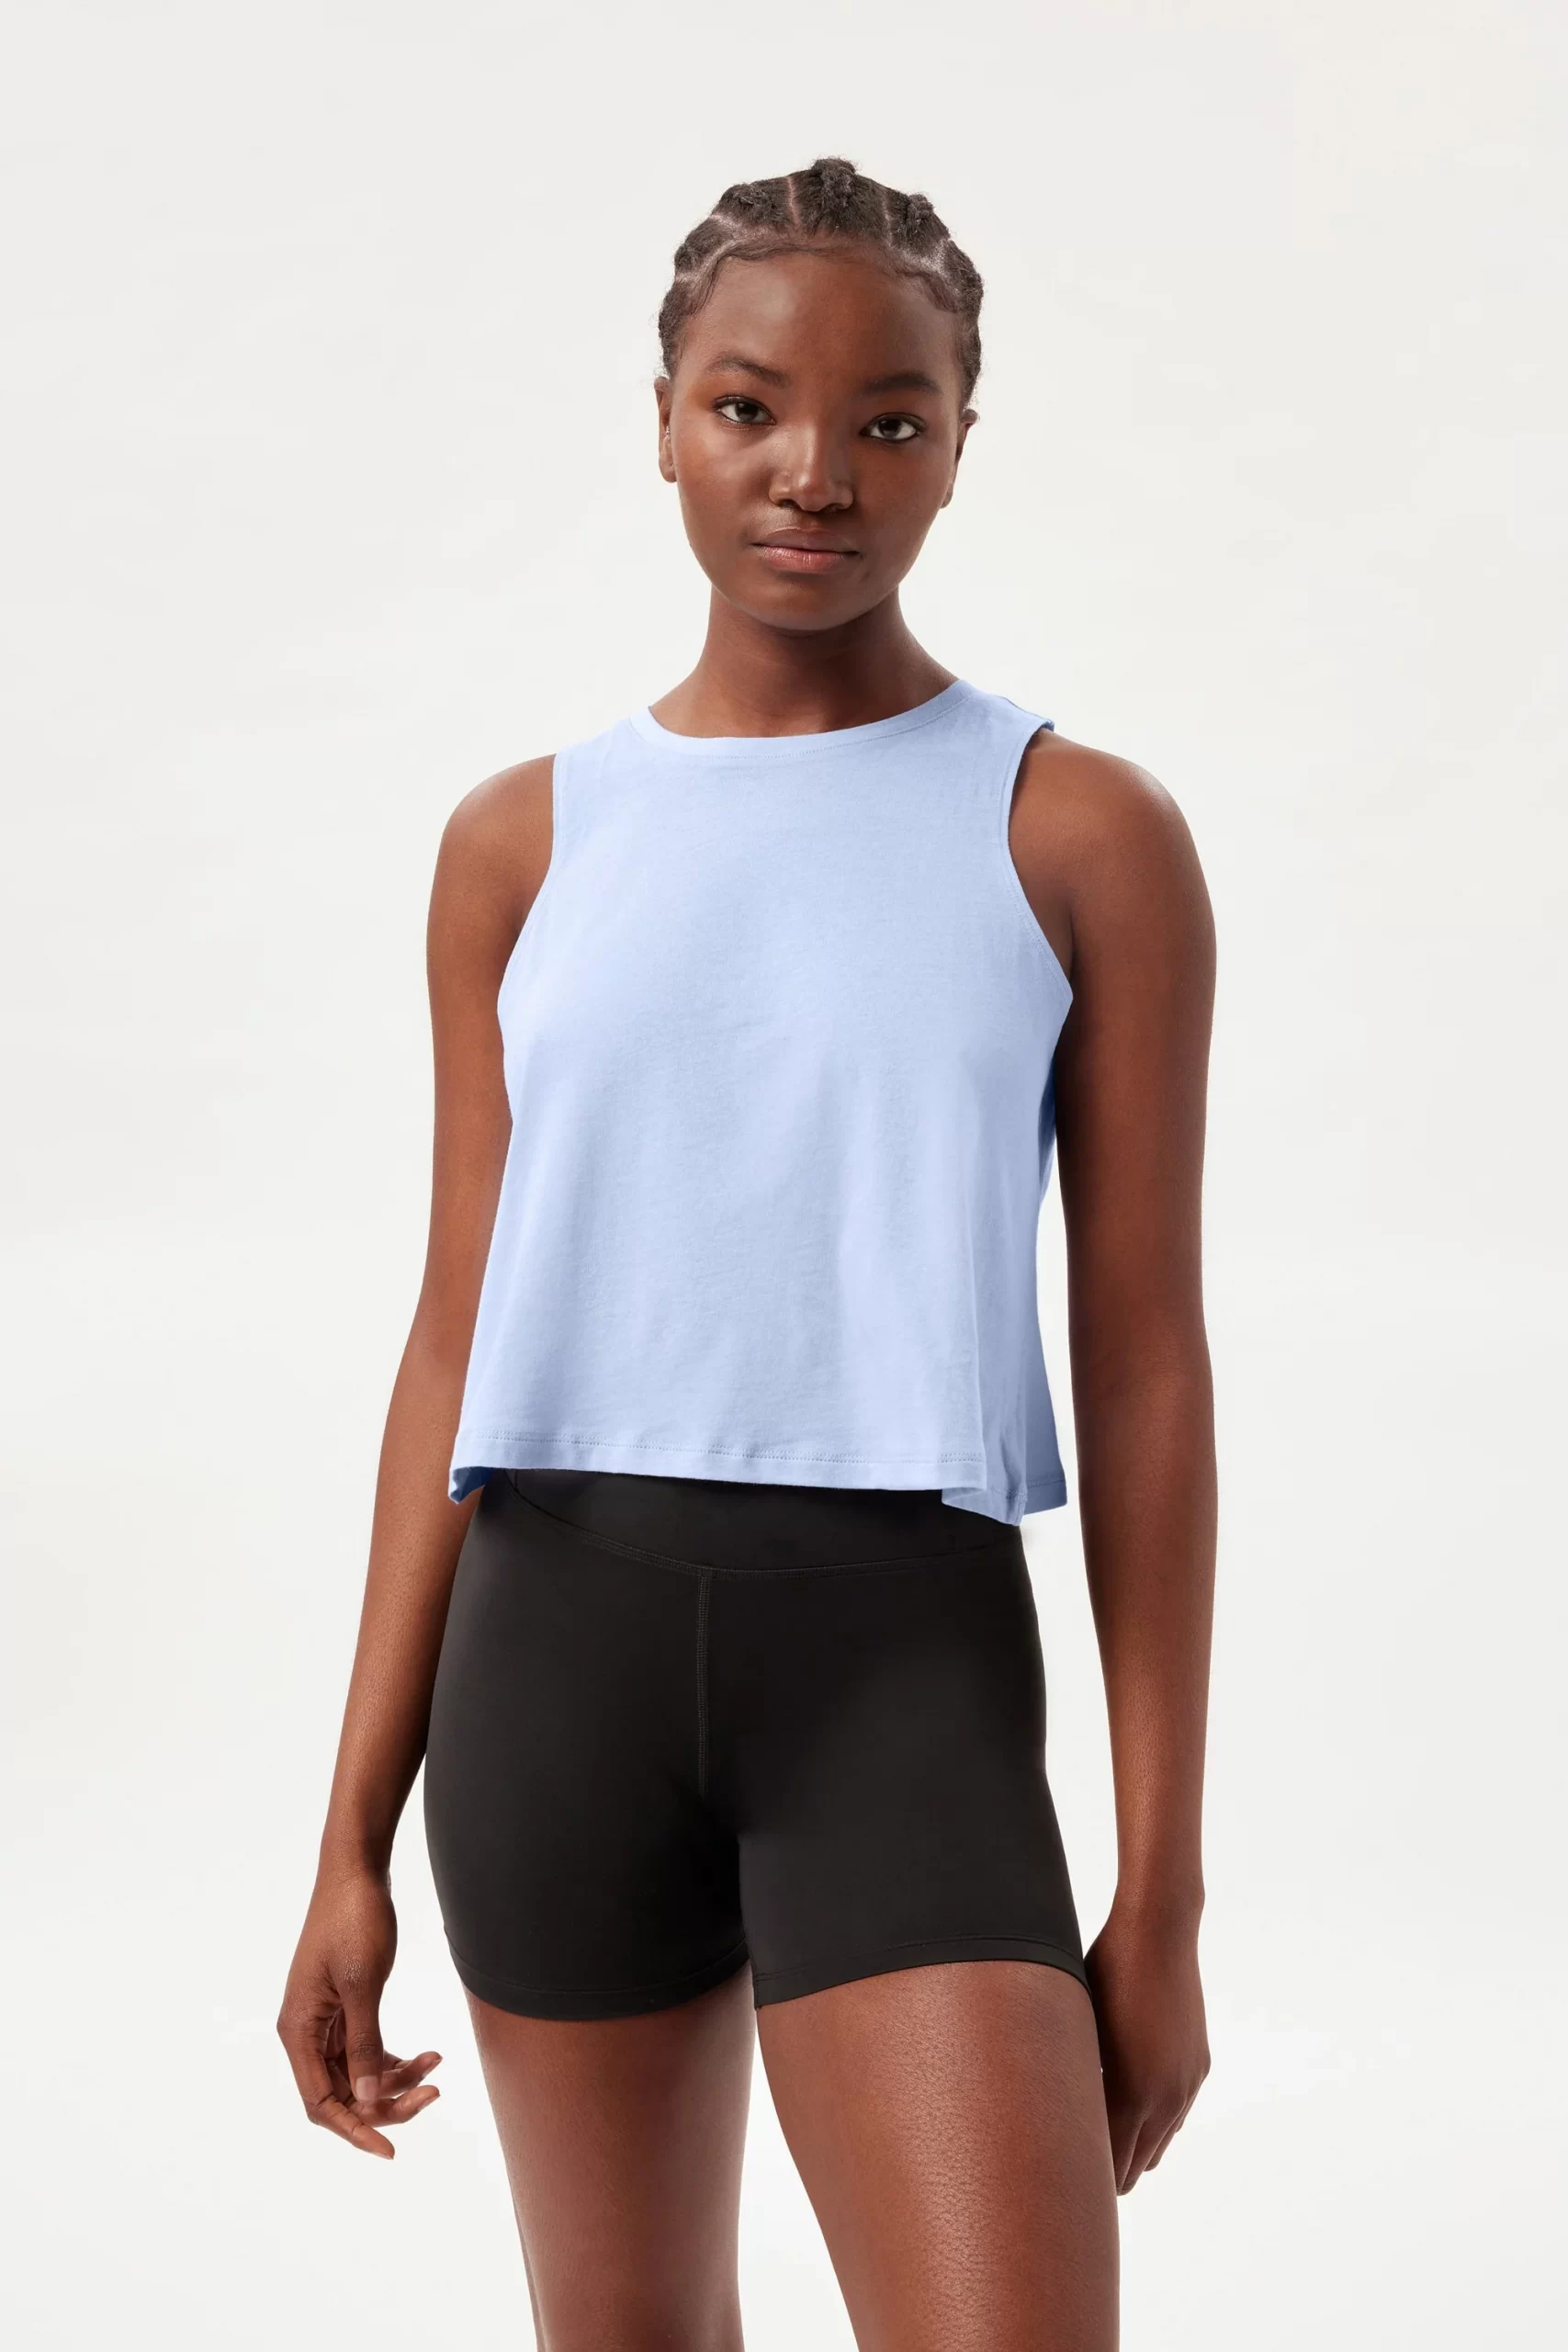 Girlfriend collective Review : ethically-made sustainable activewear